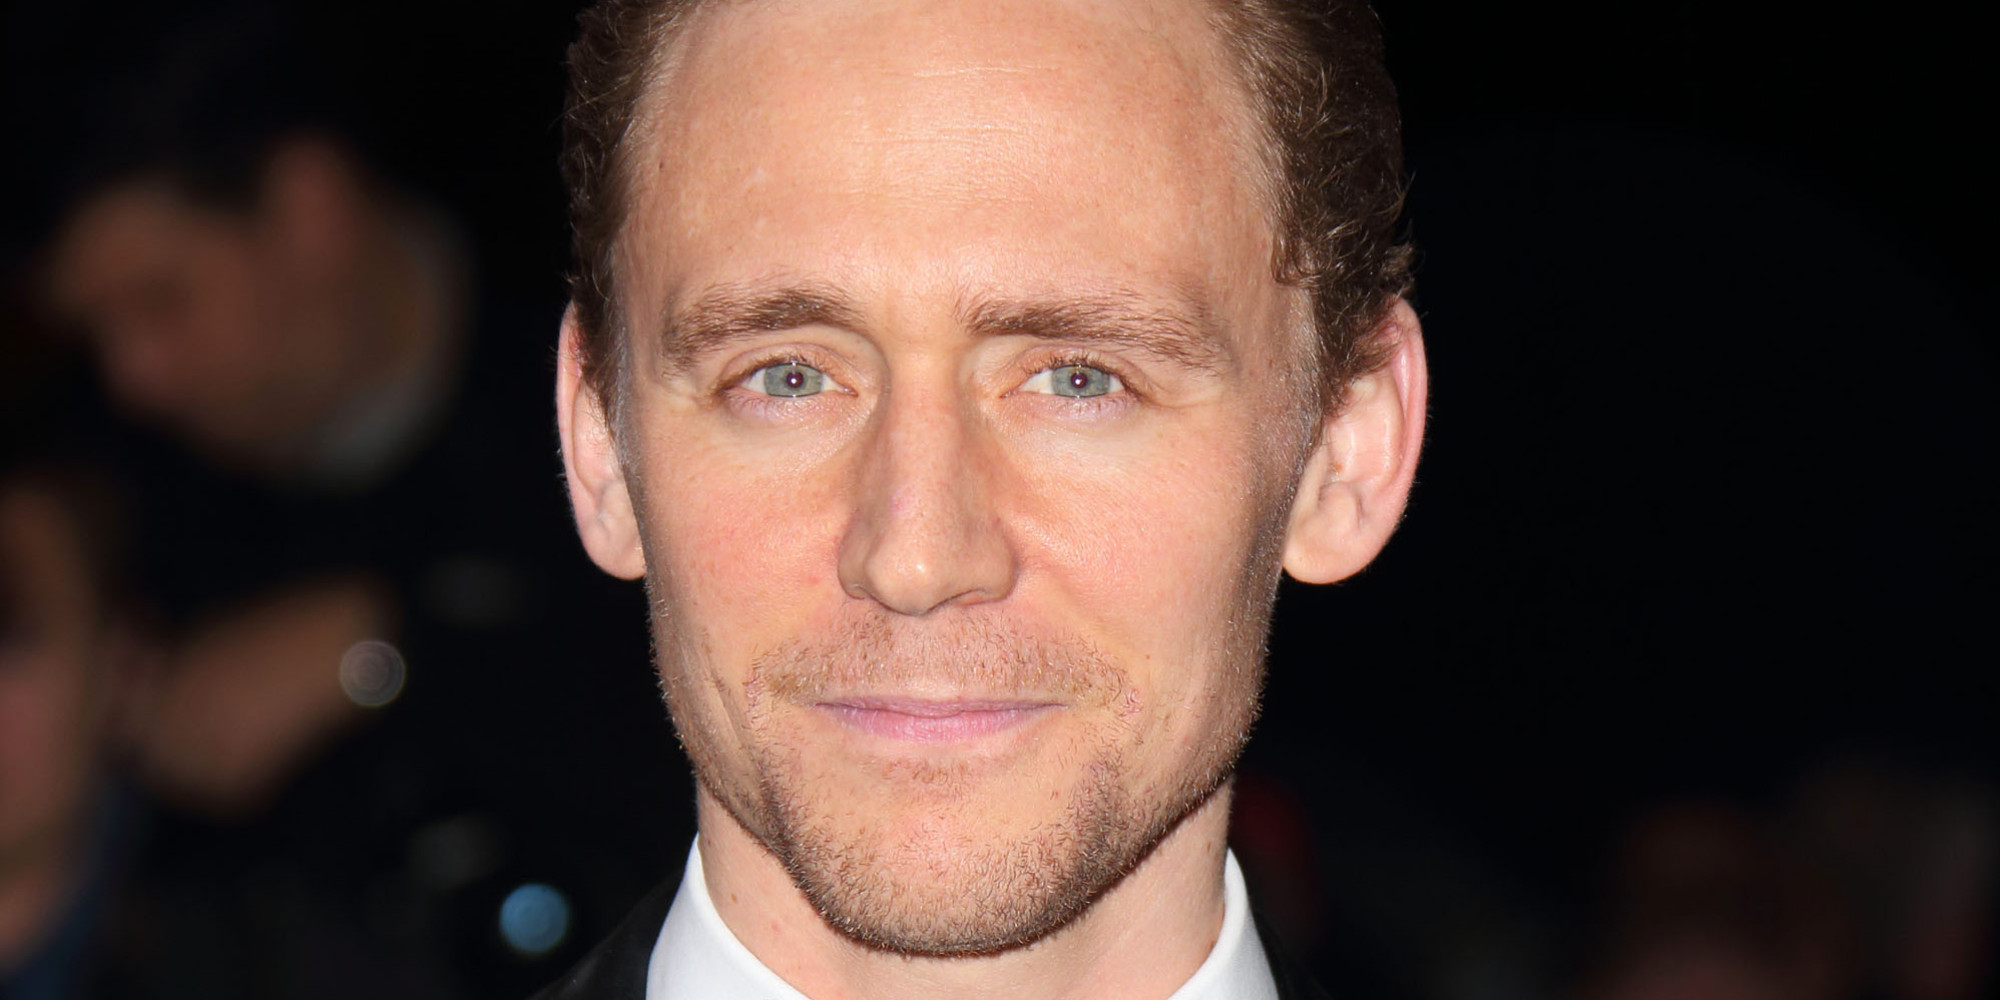 Geek insider, geekinsider, geekinsider. Com,, tom hiddleston's charming thank-you email to joss whedon, entertainment